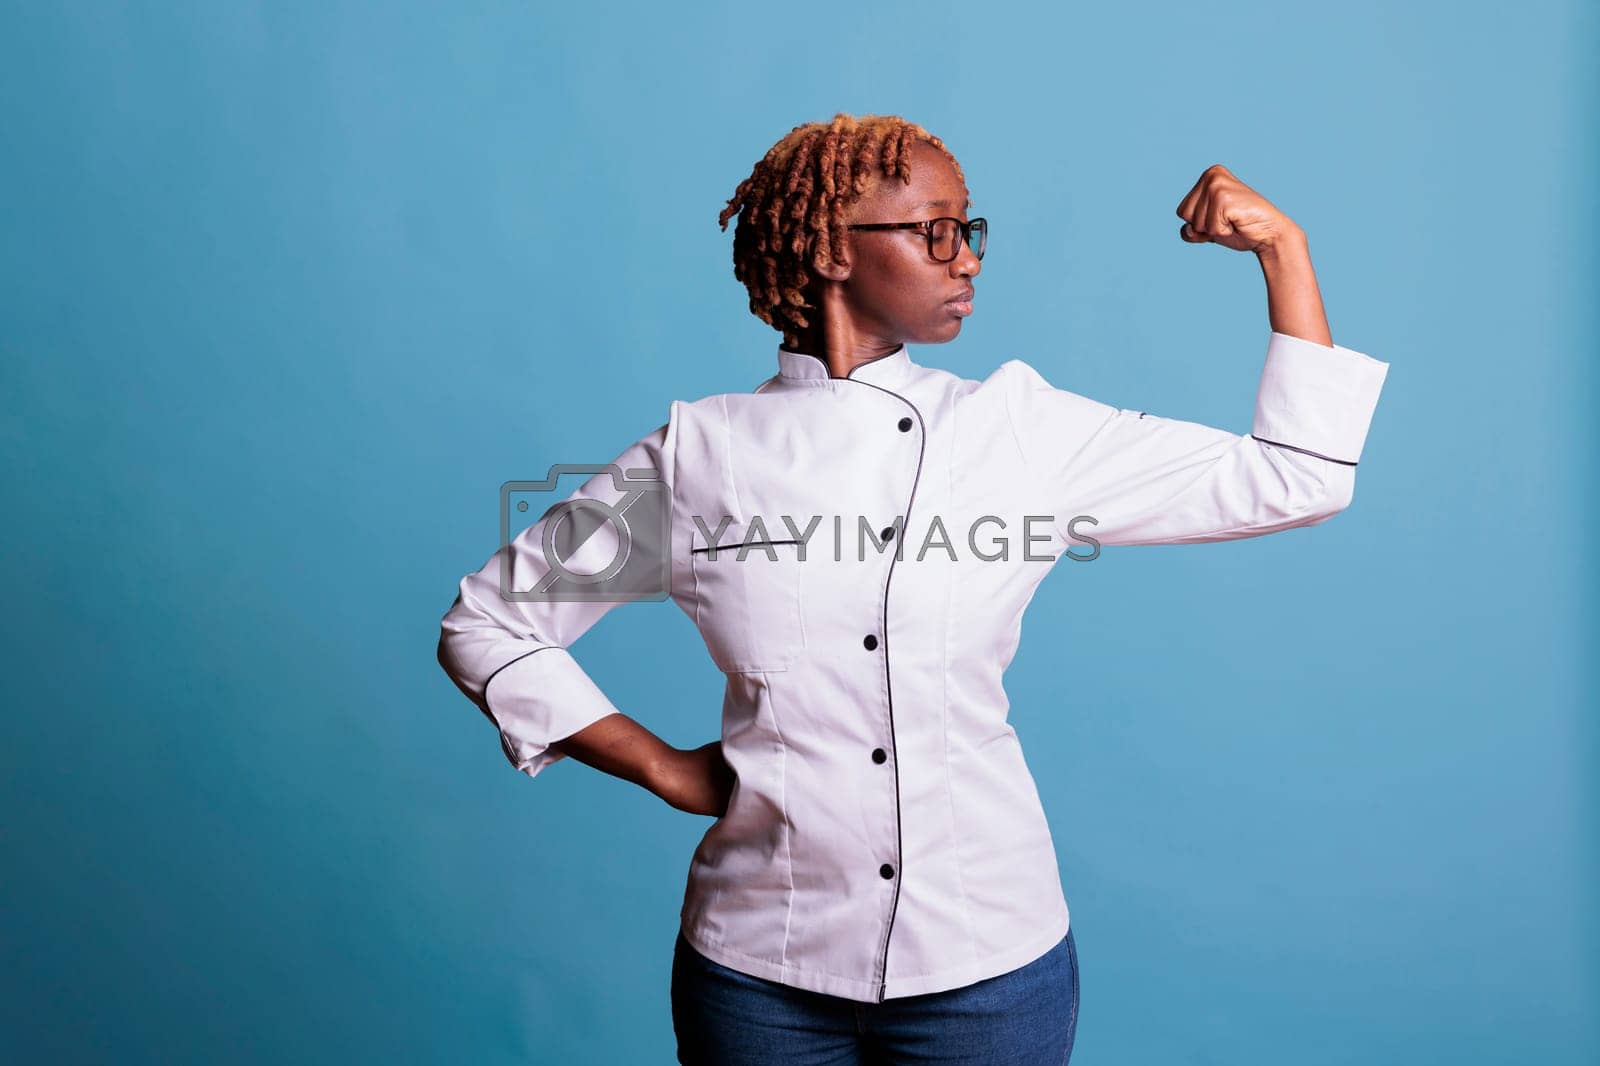 Royalty free image of Female cook flexing arm with pose of power by DCStudio